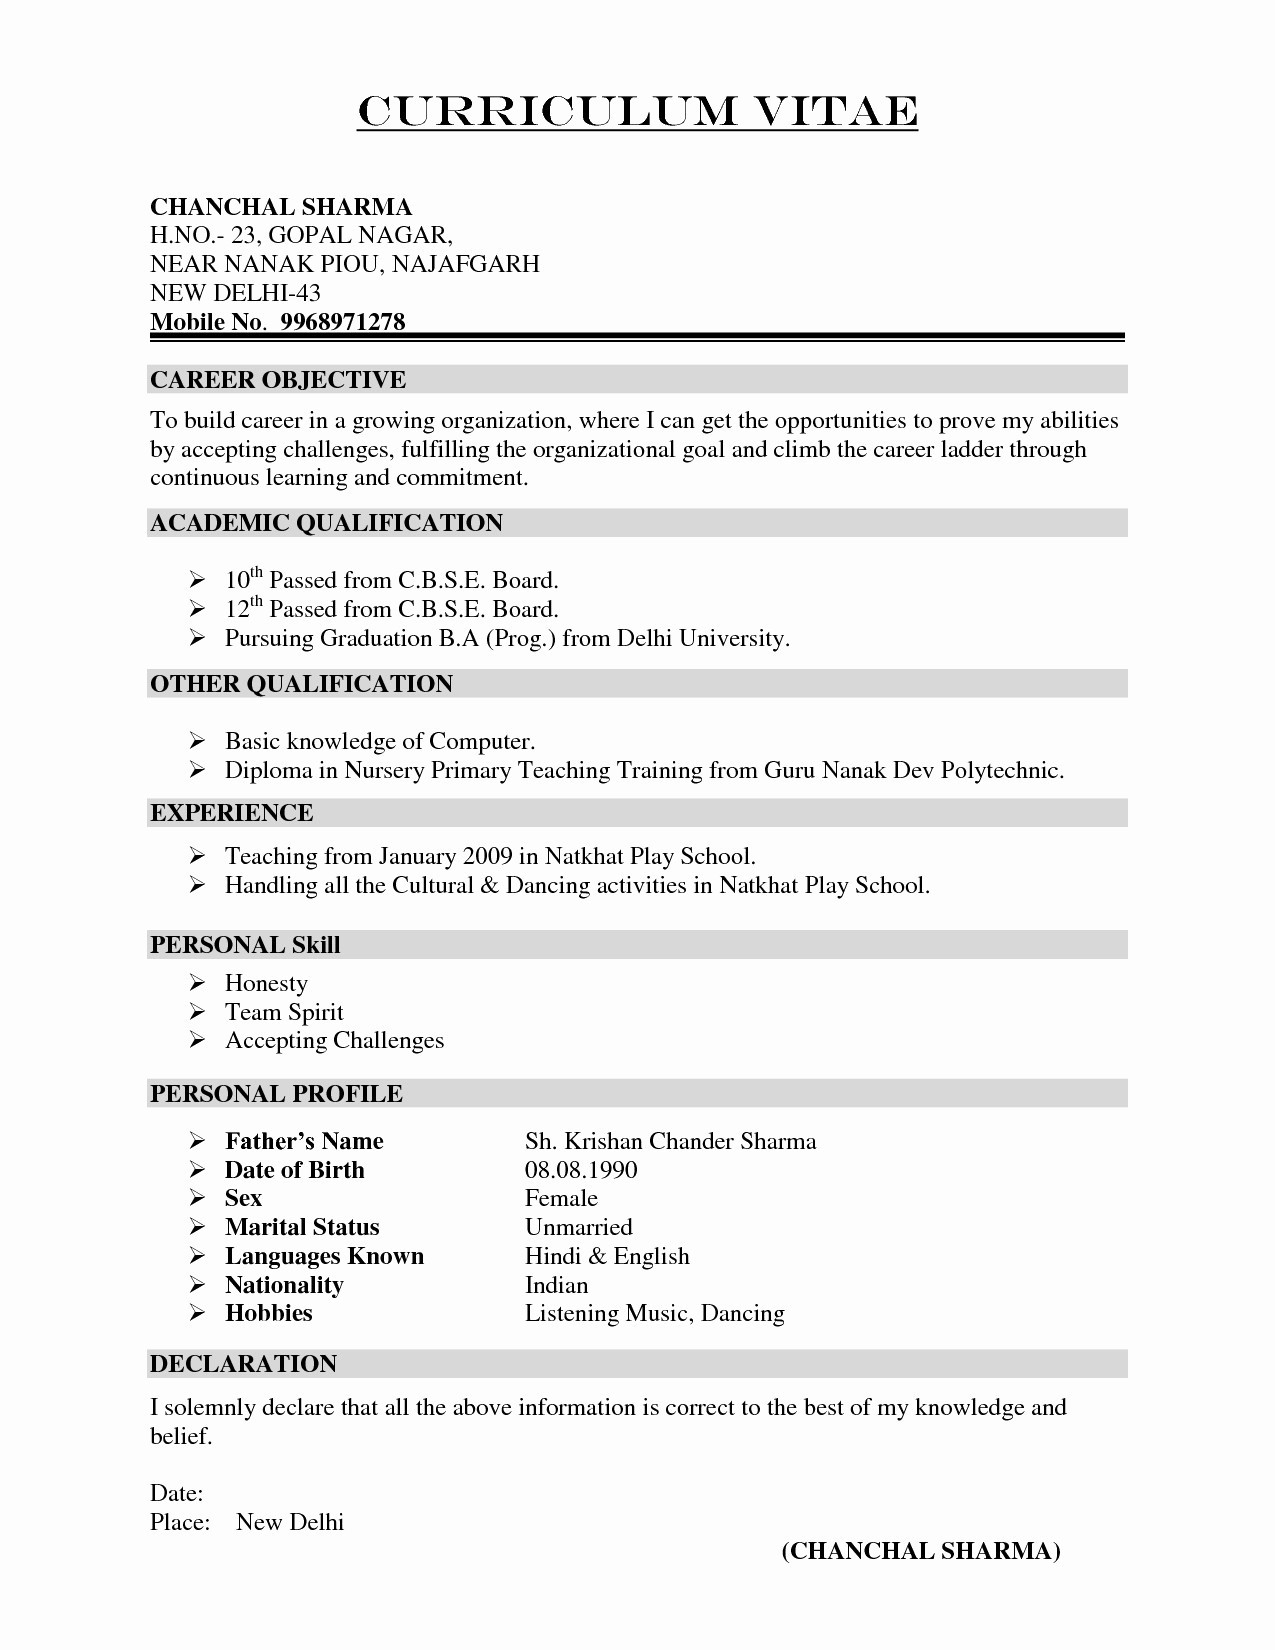 Cover Letter Template for Teenager - Internship Resume Best New Resume Cover Letter formatted